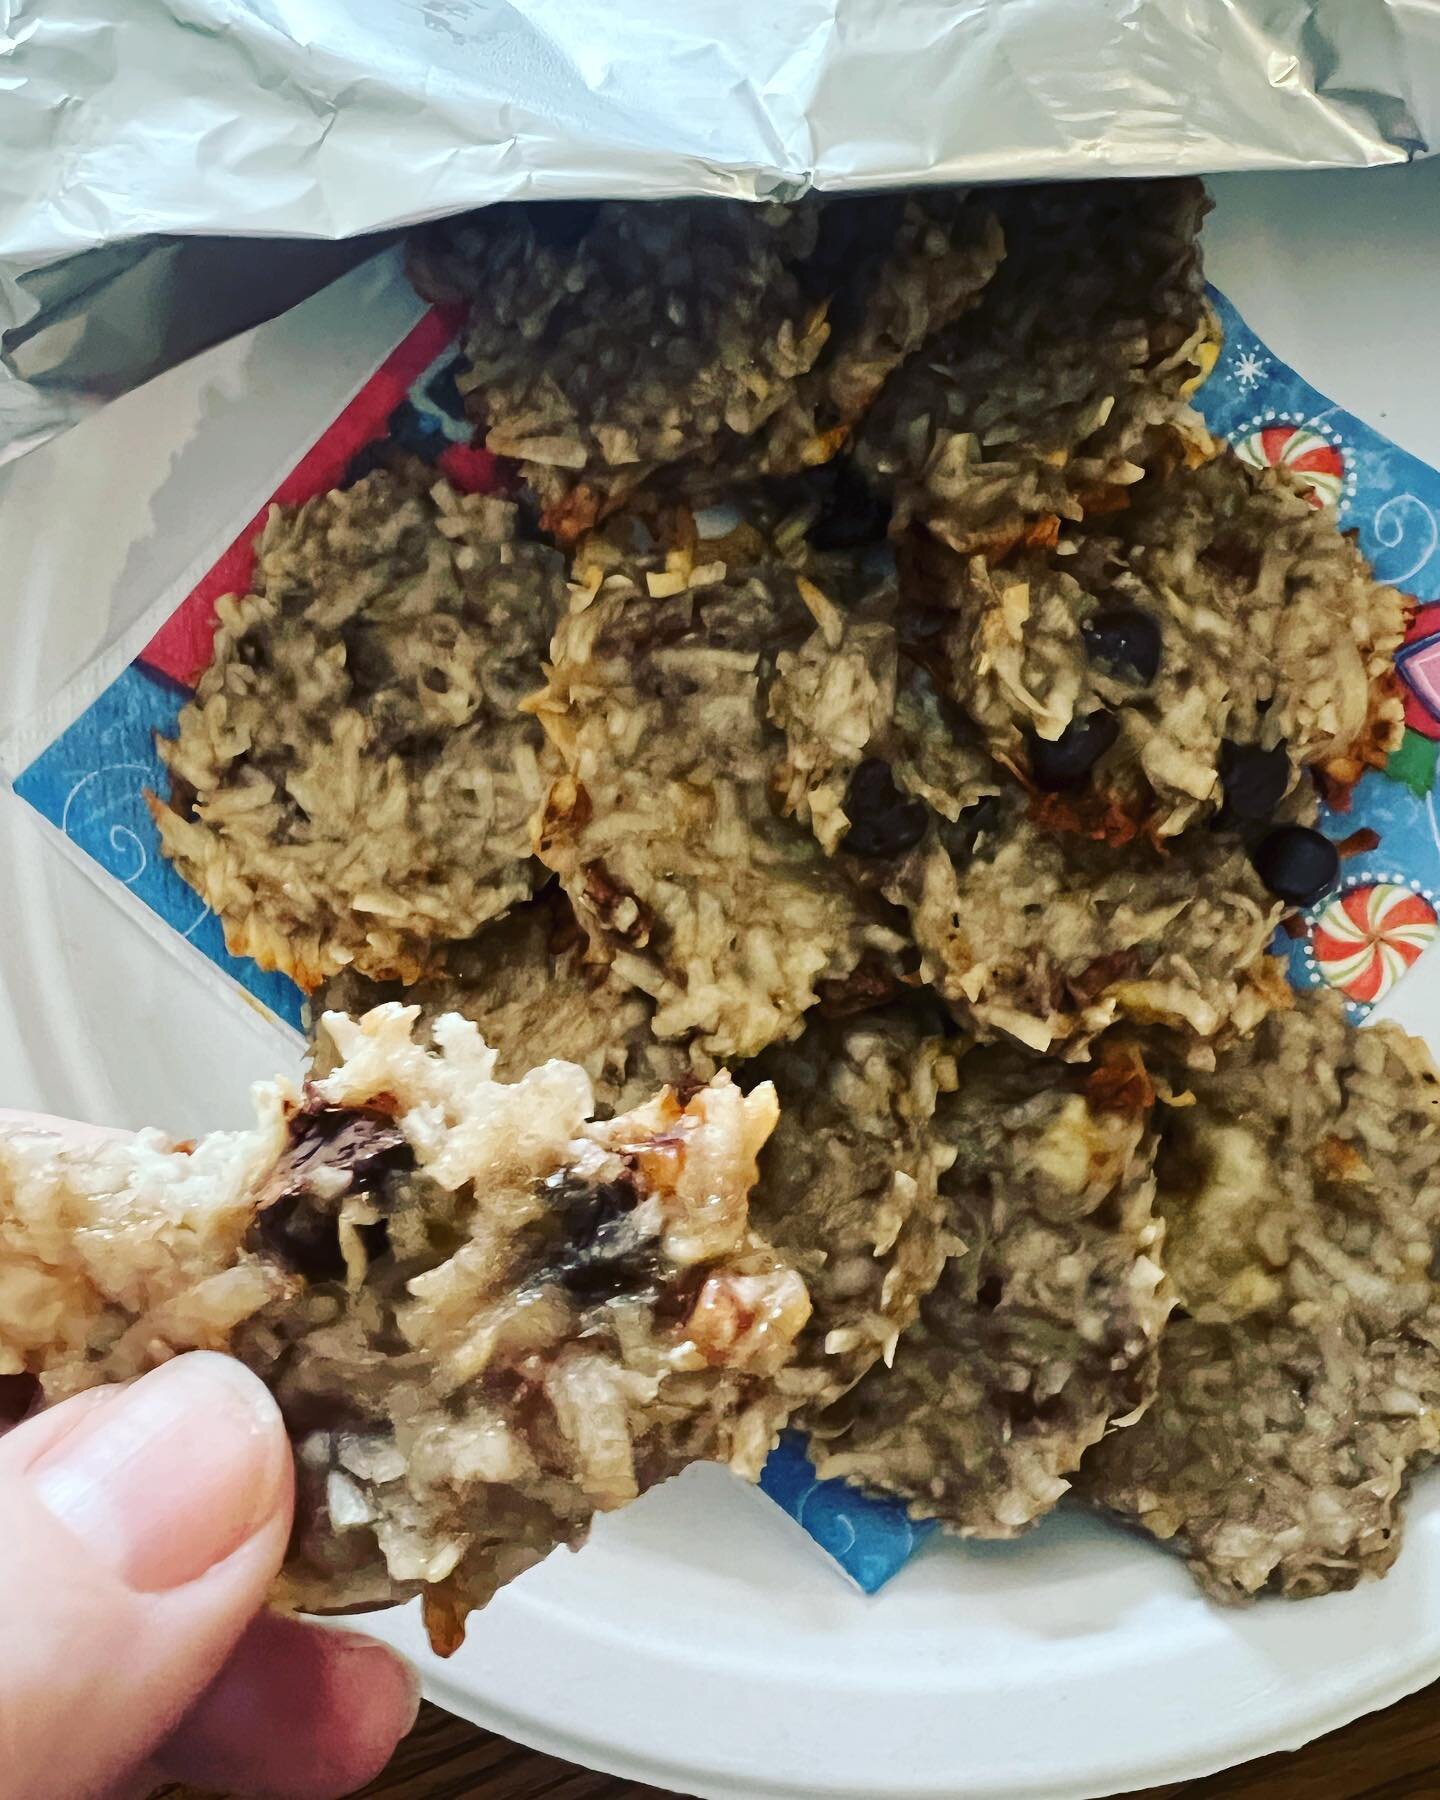 Where have these been my whole life? A great friend dropped them off at my doorstep and I was thrilled for a guilt free treat that tastes naughty! She shared the secret: Just mash a banana with 3/4 cup shredded unsweetened coconut (pulse to blend but